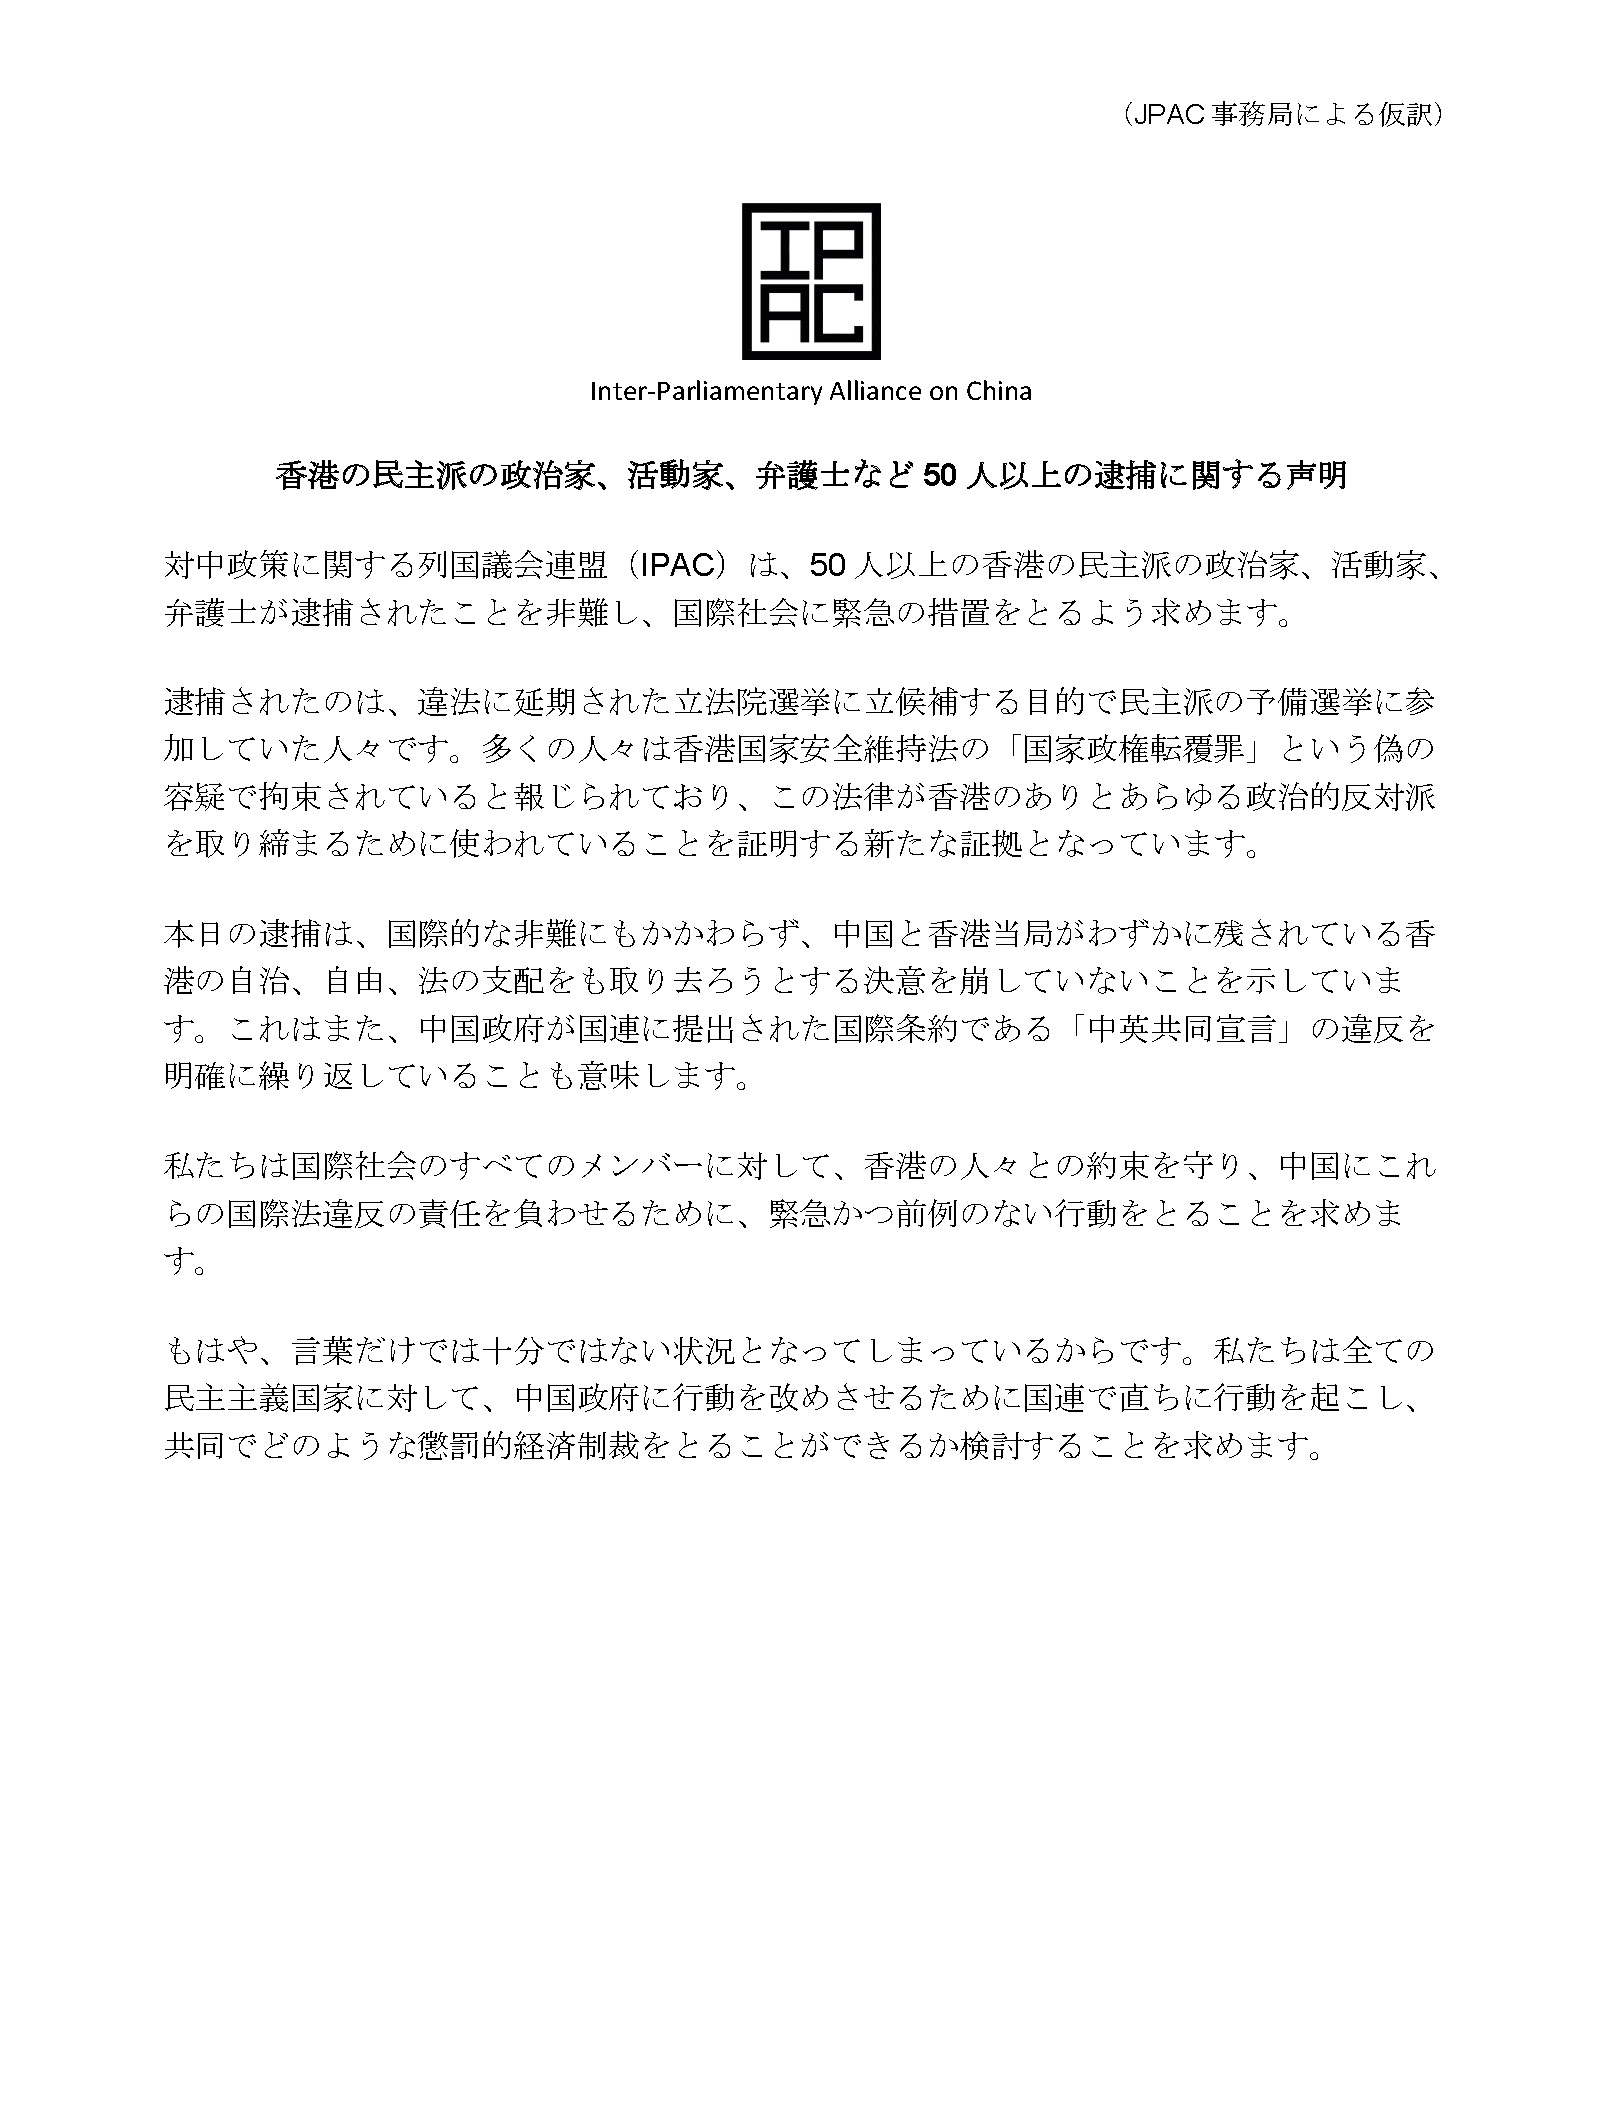 Inter Parliamentary Alliance On China Ipac Statement On Arrests Of Over 50 Hong Kong Politicians Activists And Lawyers Supported By Japan Parliamentary Alliance On China Jpac Twitter